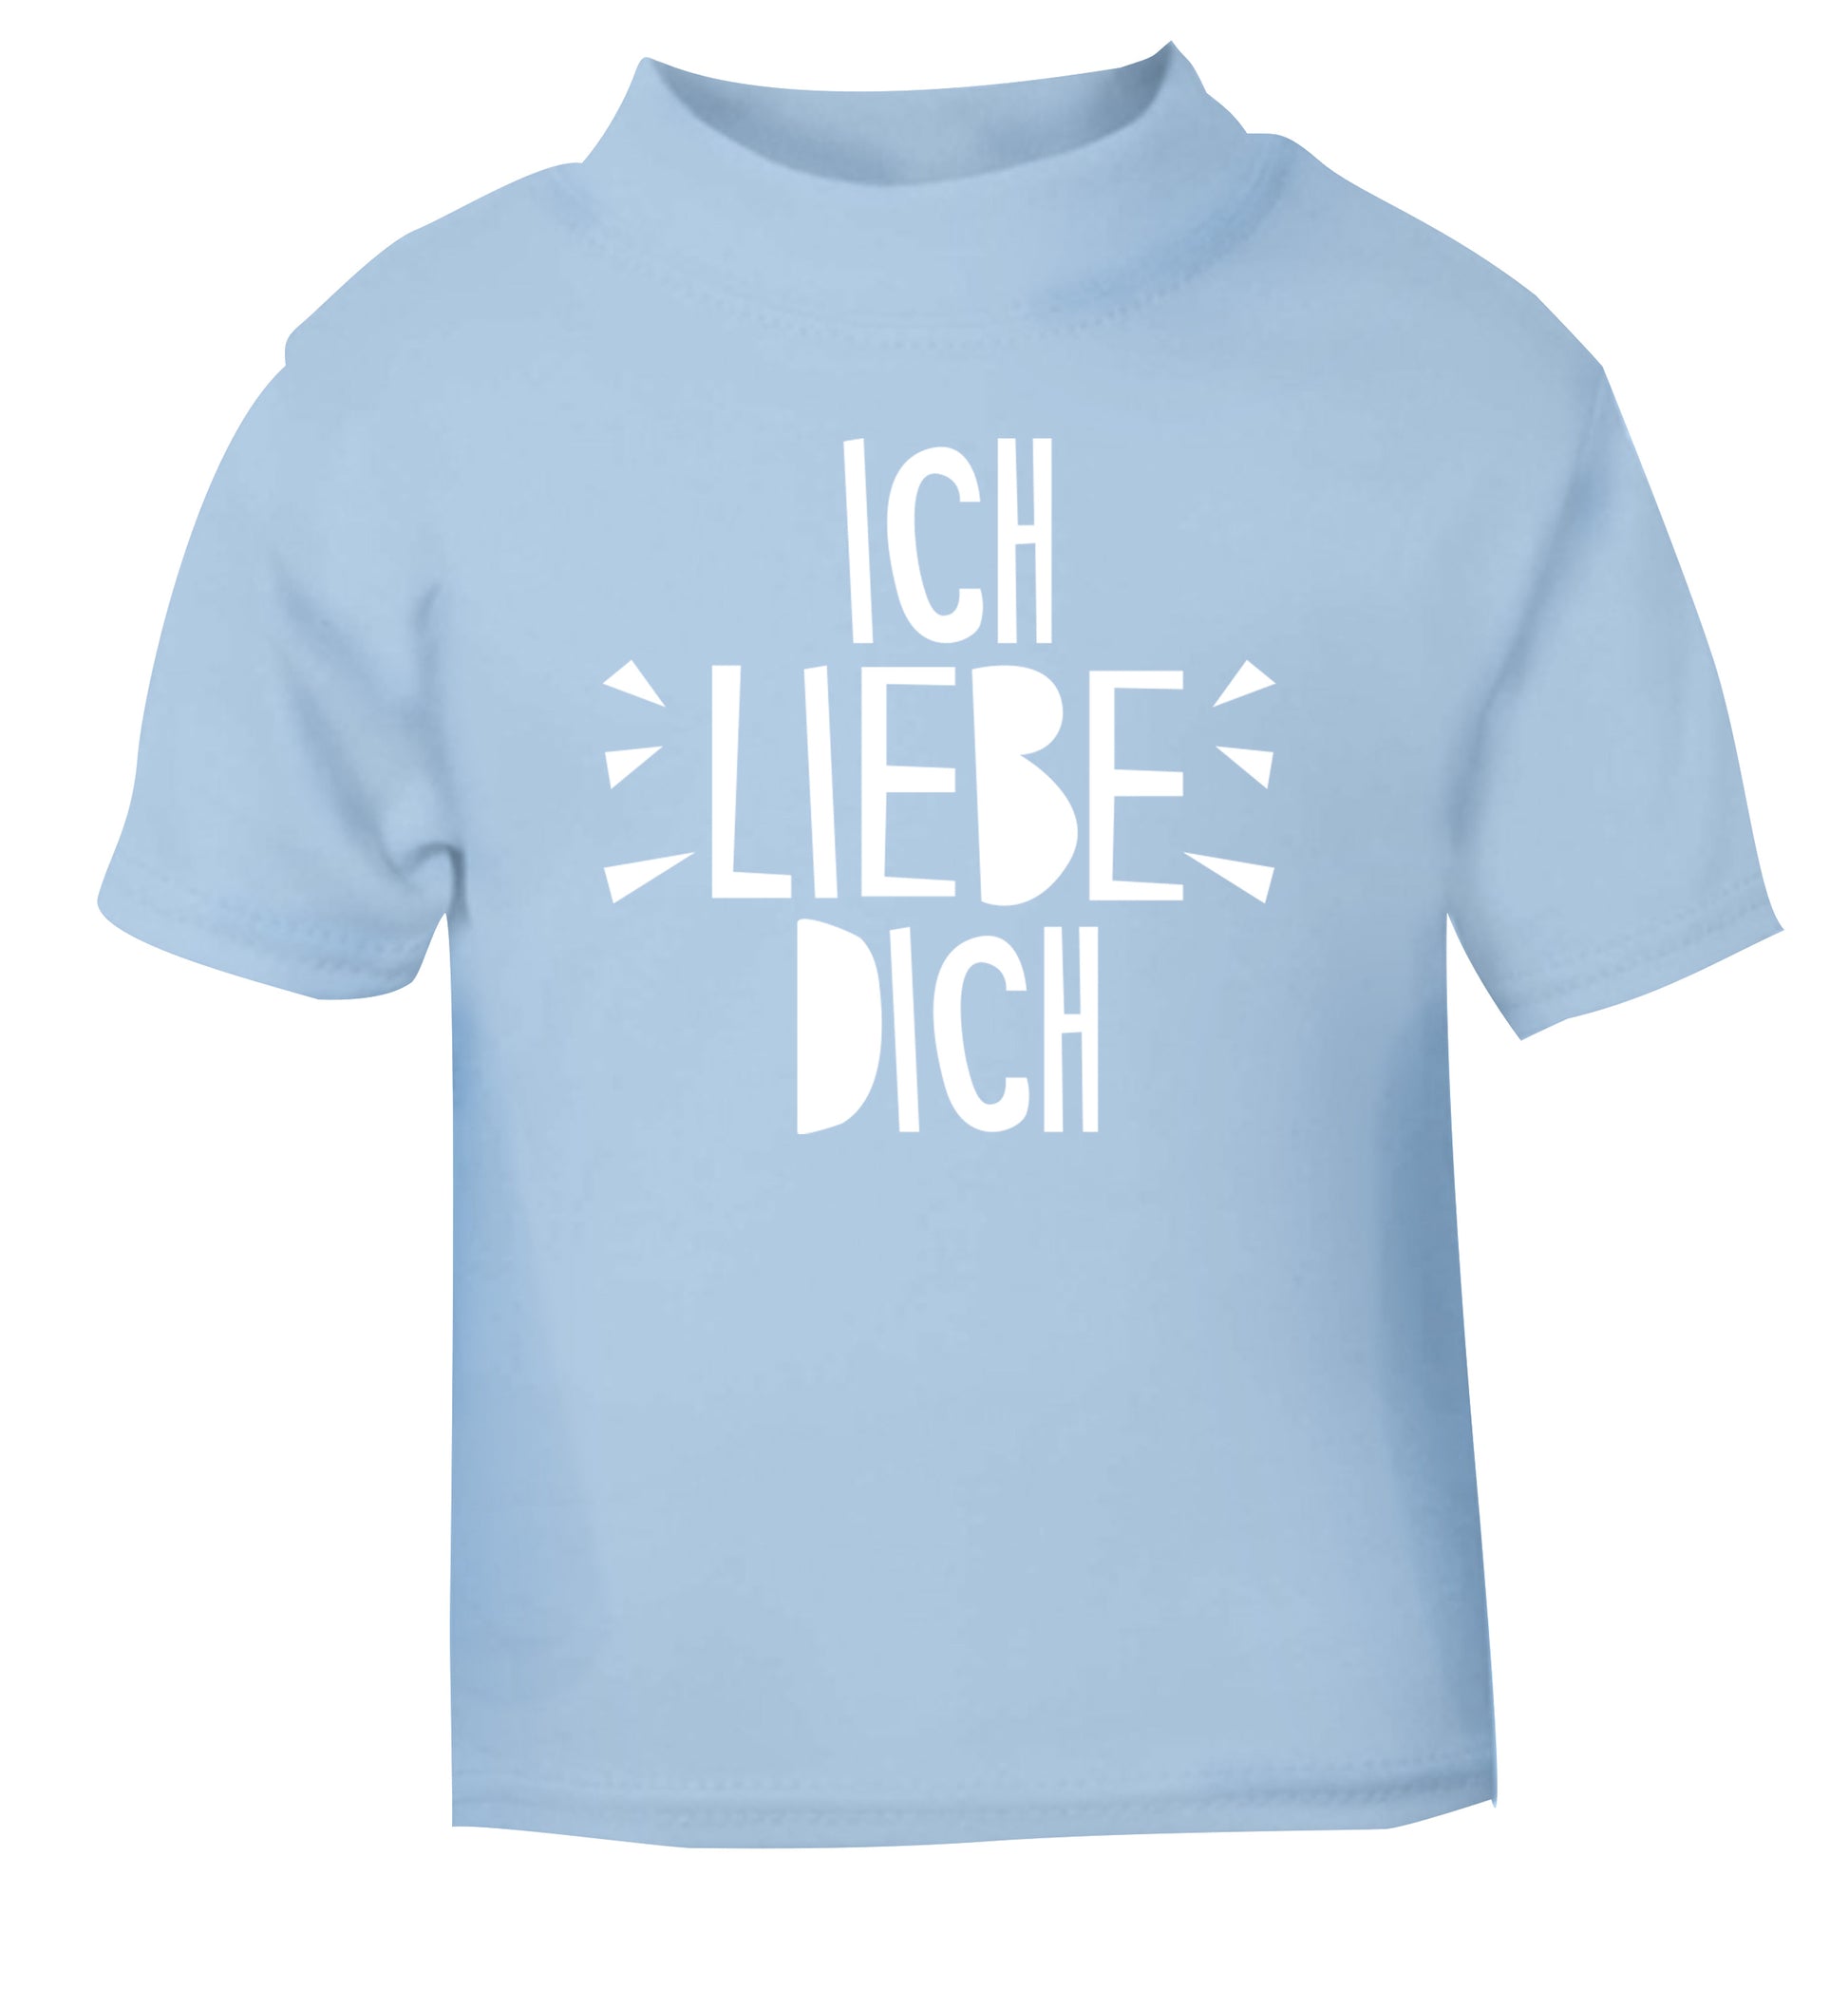 Ich liebe dich - I love you light blue Baby Toddler Tshirt 2 Years